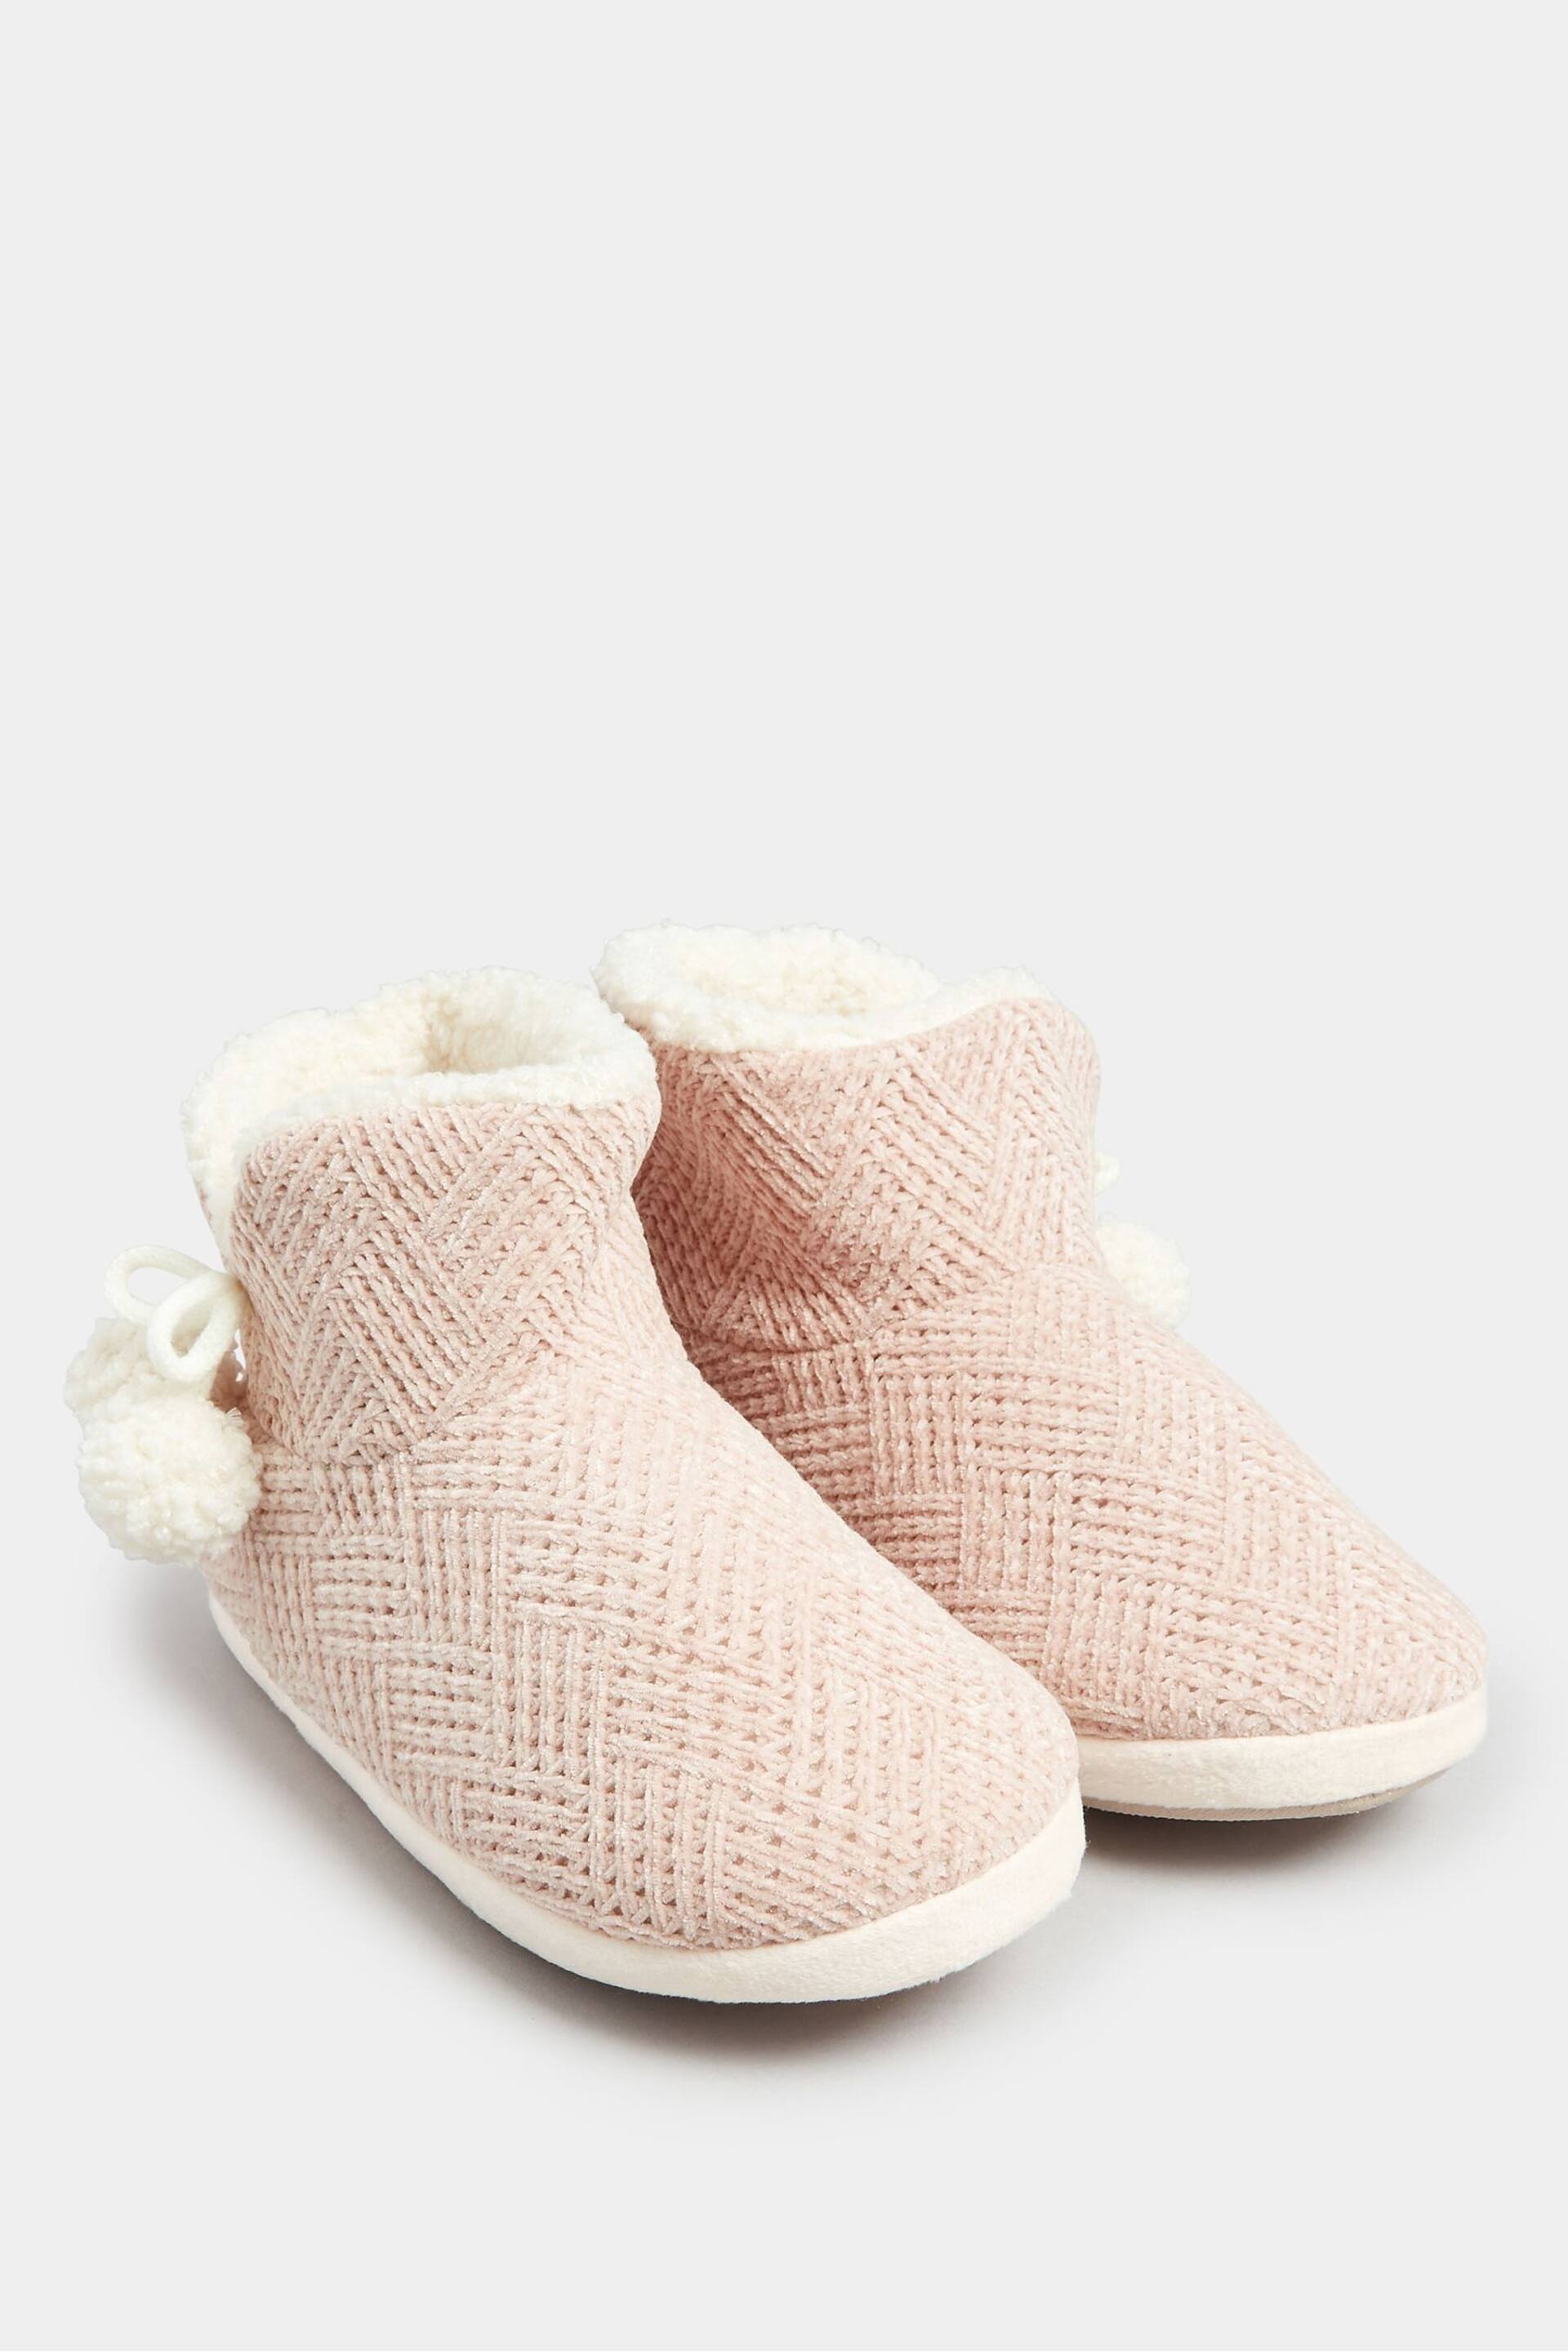 Yours Curve Pink Wide Fit Fluffy Chevron Boots Slippers - Image 2 of 5